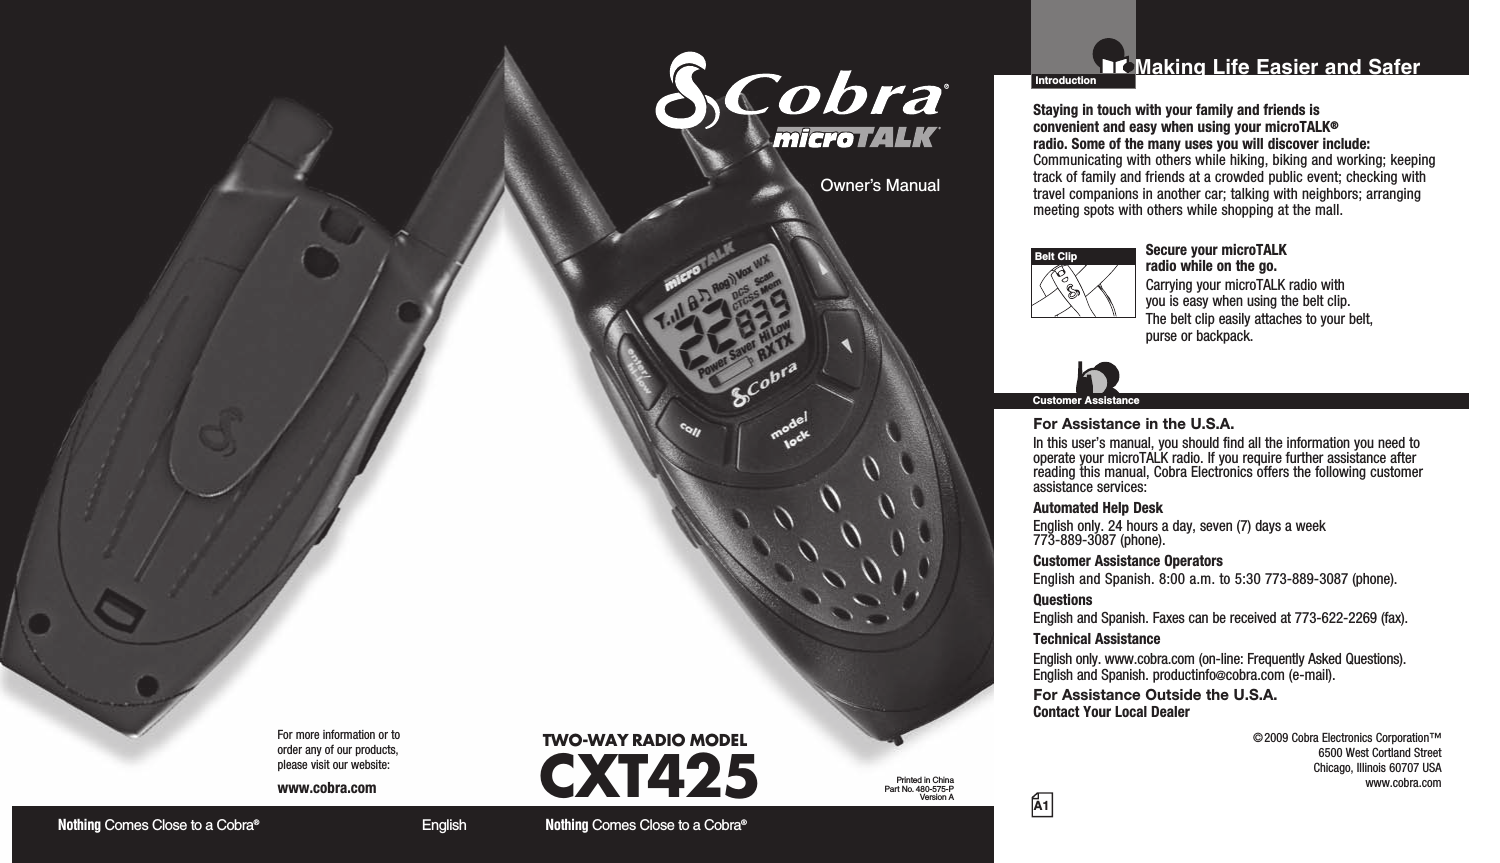 Nothing Comes Close to a Cobra®  EnglishFor more information or to  order any of our products,  please visit our website:www.cobra.comA1Making Life Easier and SaferOwner’s ManualNothing Comes Close to a Cobra® TWO-WAY RADIO  MODEL CXT425 Printed in ChinaPart No. 480-575-PVersion AIntroductionStaying in touch with your family and friends is  convenient and easy when using your microTALK® radio. Some of the many uses you will discover include:Communicating with others while hiking, biking and working; keeping track of family and friends at a crowded public event; checking with travel companions in another car; talking with neighbors; arranging meeting spots with others while shopping at the mall. Secure your microTALK  radio while on the go.Carrying your microTALK radio with  you is easy when using the belt clip. The belt clip easily attaches to your belt,  purse or backpack. For Assistance in the U.S.A. In this user’s manual, you should find all the information you need to operate your microTALK radio. If you require further assistance after reading this manual, Cobra Electronics offers the following customer assistance services:Automated Help Desk English only. 24 hours a day, seven (7) days a week  773-889-3087 (phone). Customer Assistance Operators English and Spanish. 8:00 a.m. to 5:30 773-889-3087 (phone). Questions English and Spanish. Faxes can be received at 773-622-2269 (fax). Technical Assistance English only. www.cobra.com (on-line: Frequently Asked Questions).  English and Spanish. productinfo@cobra.com (e-mail).For Assistance Outside the U.S.A. Contact Your Local DealerBelt ClipCustomer Assistance©2009 Cobra Electronics Corporation™ 6500 West Cortland Street Chicago, Illinois 60707 USAwww.cobra.com